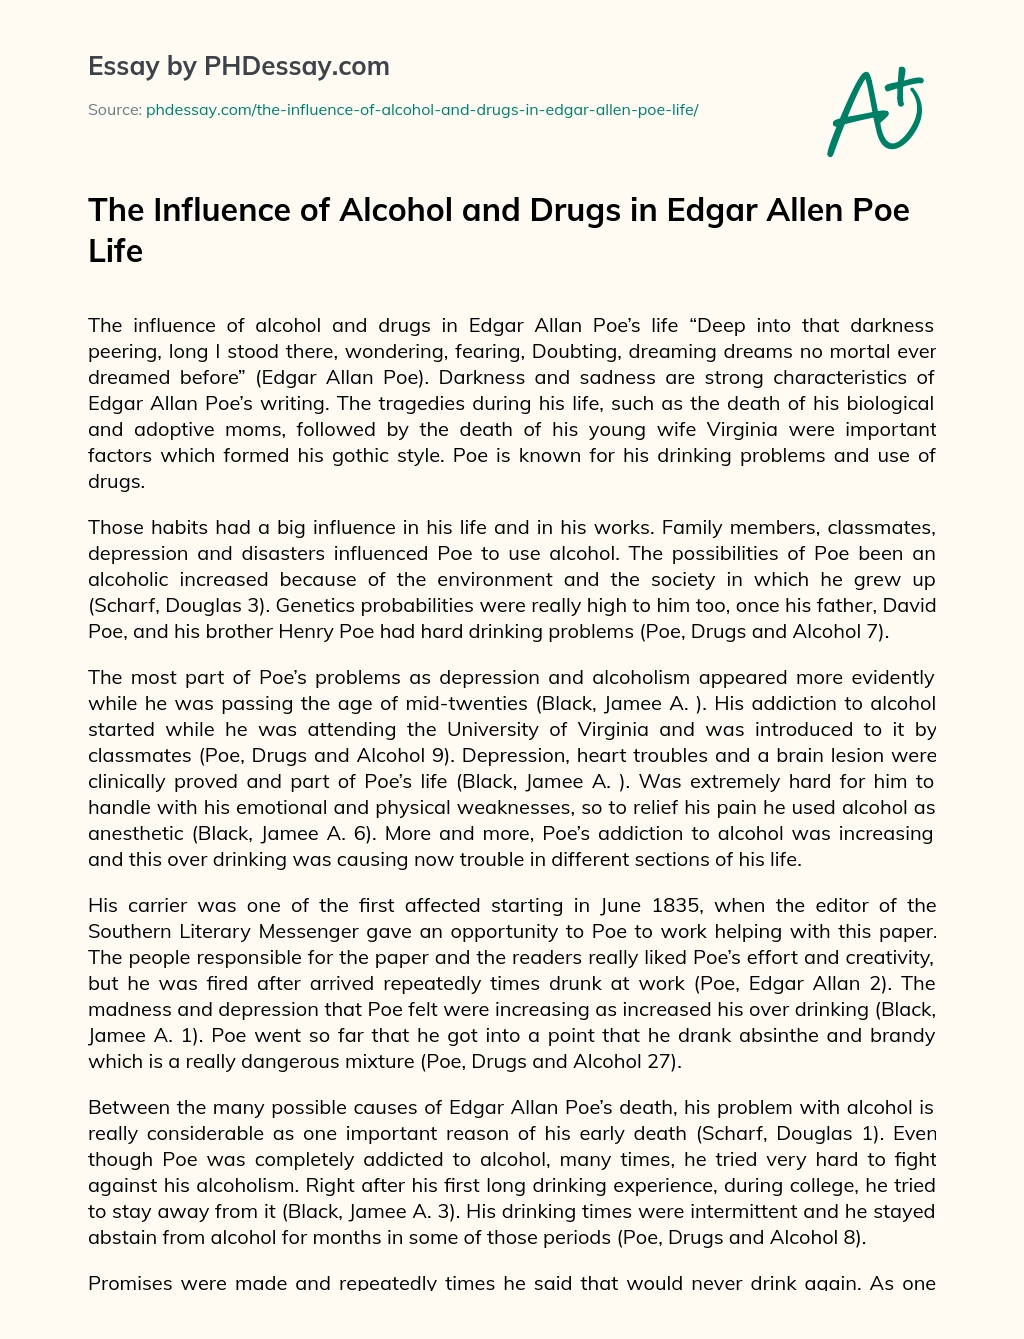 The Influence of Alcohol and Drugs in Edgar Allen Poe Life essay